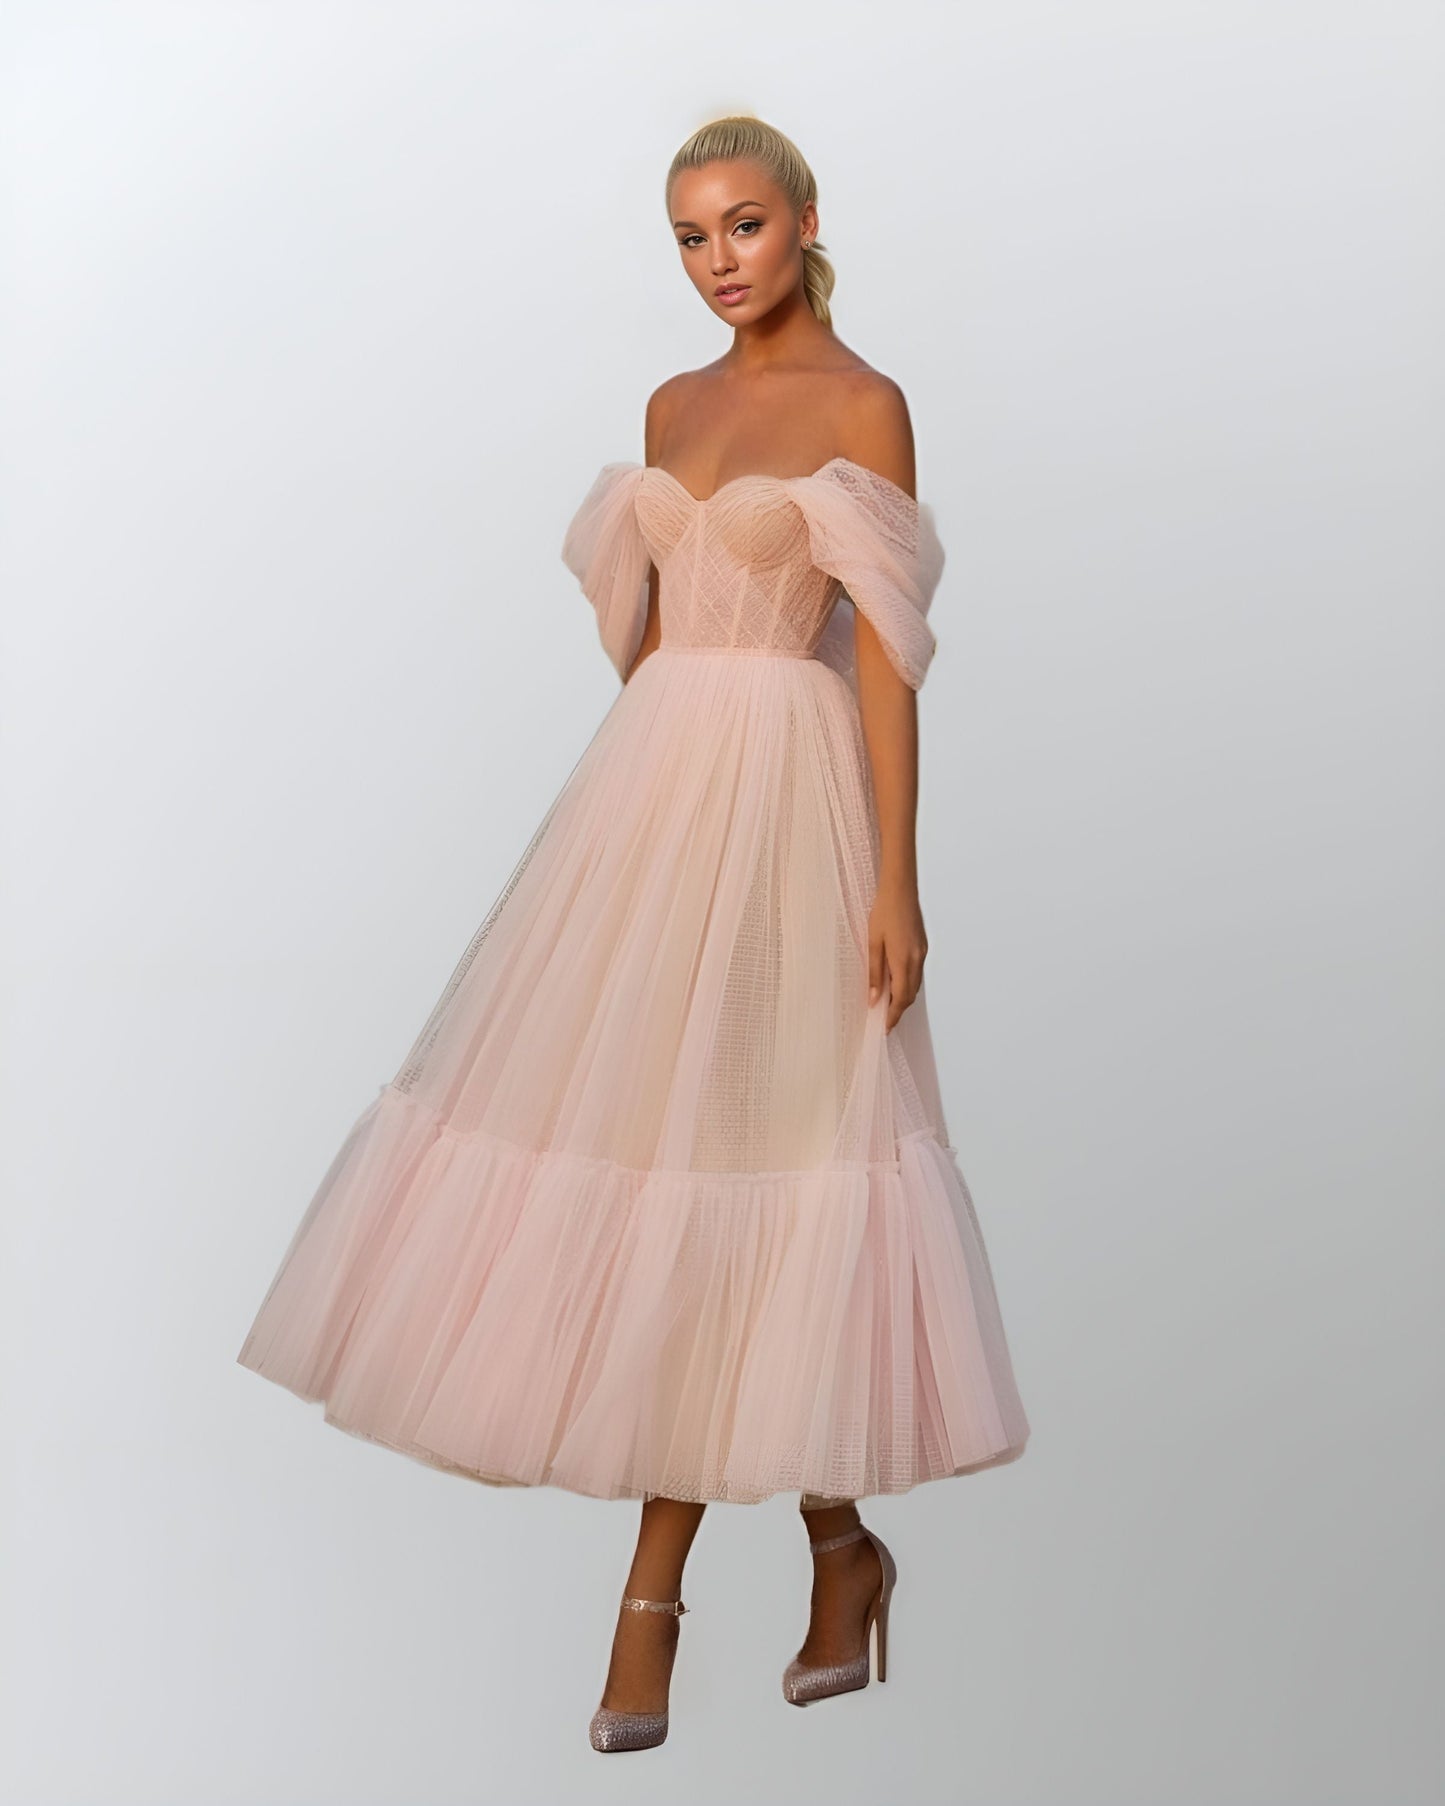 KELLY Formal Couture Dress